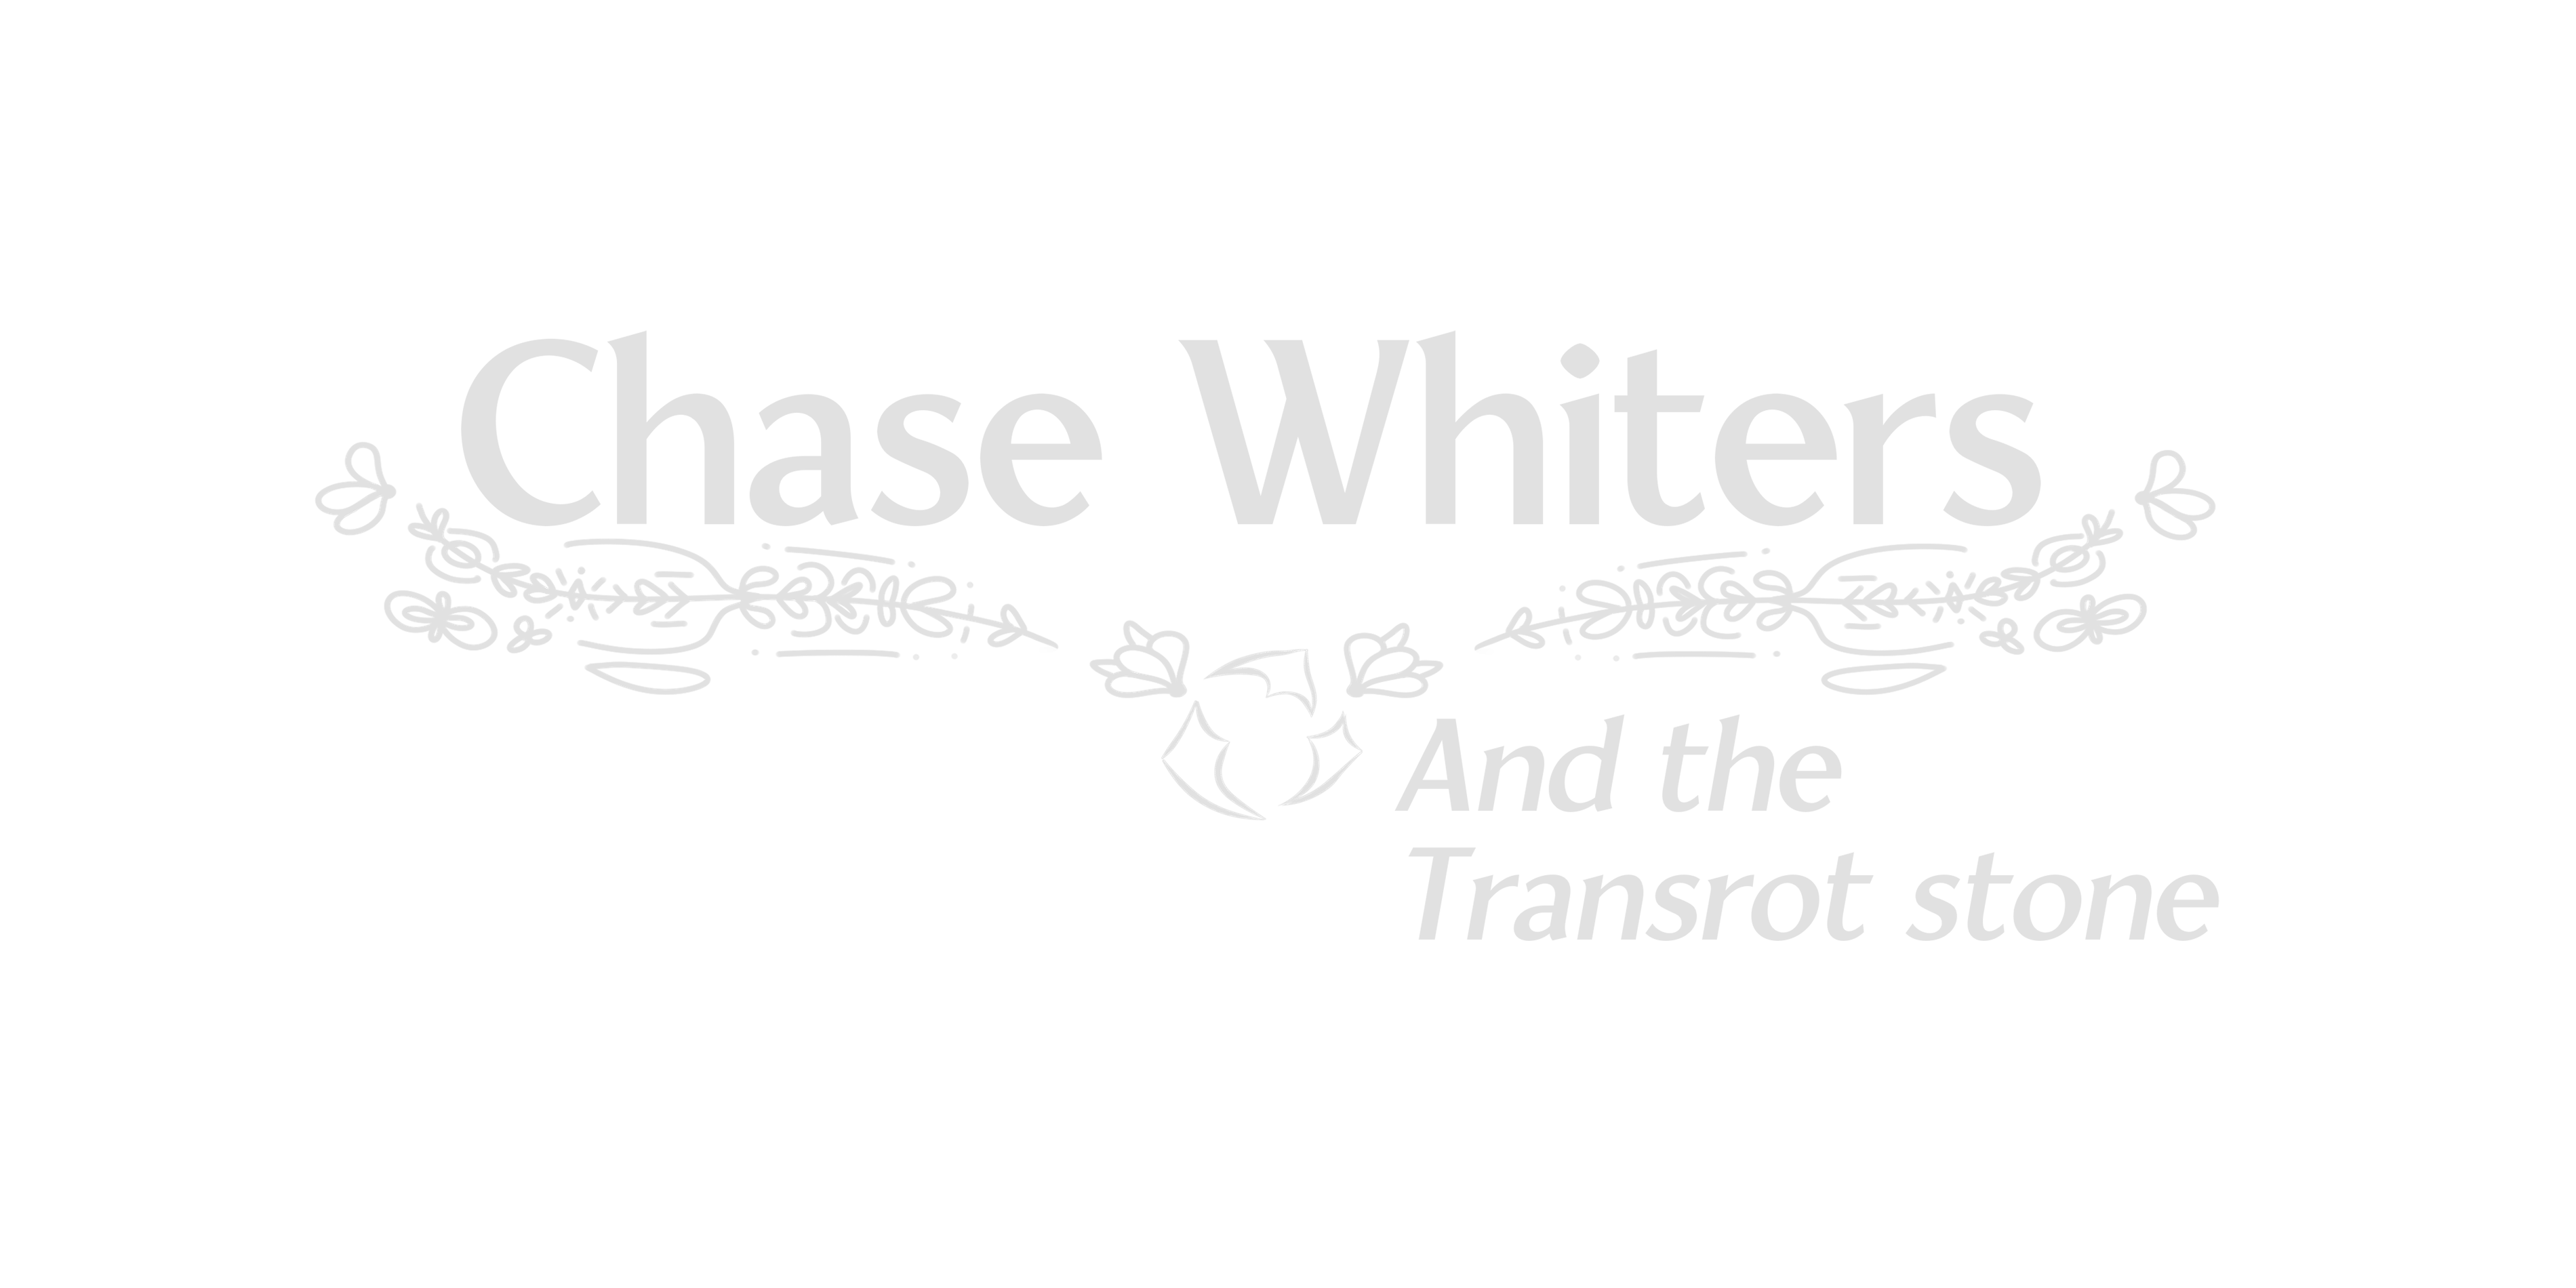 Chase Withers: And the Transrot Stone